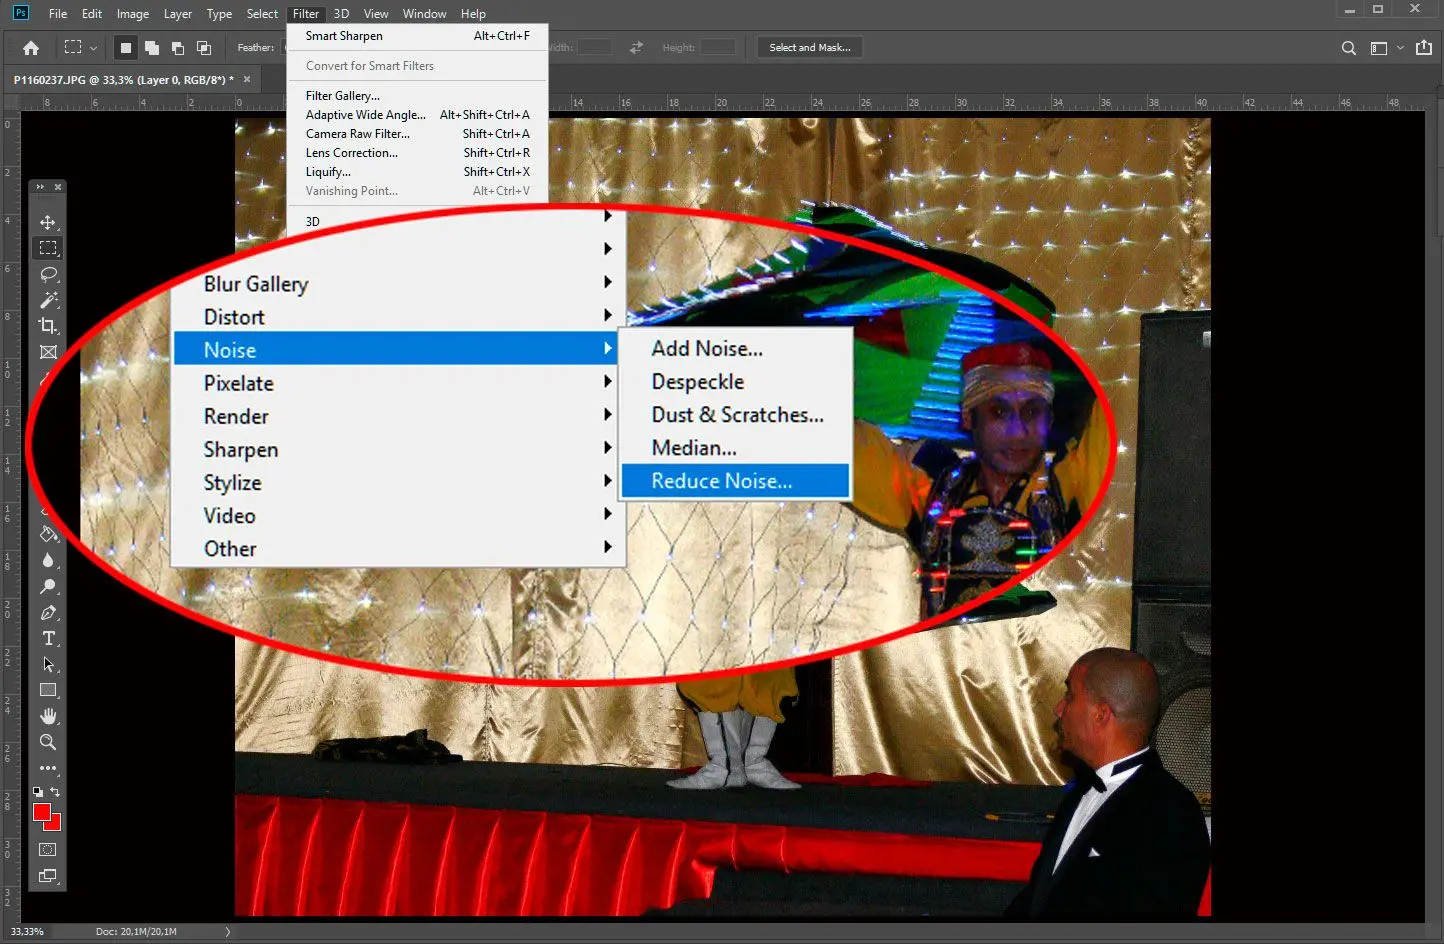 Reduce Noise in Photoshop..